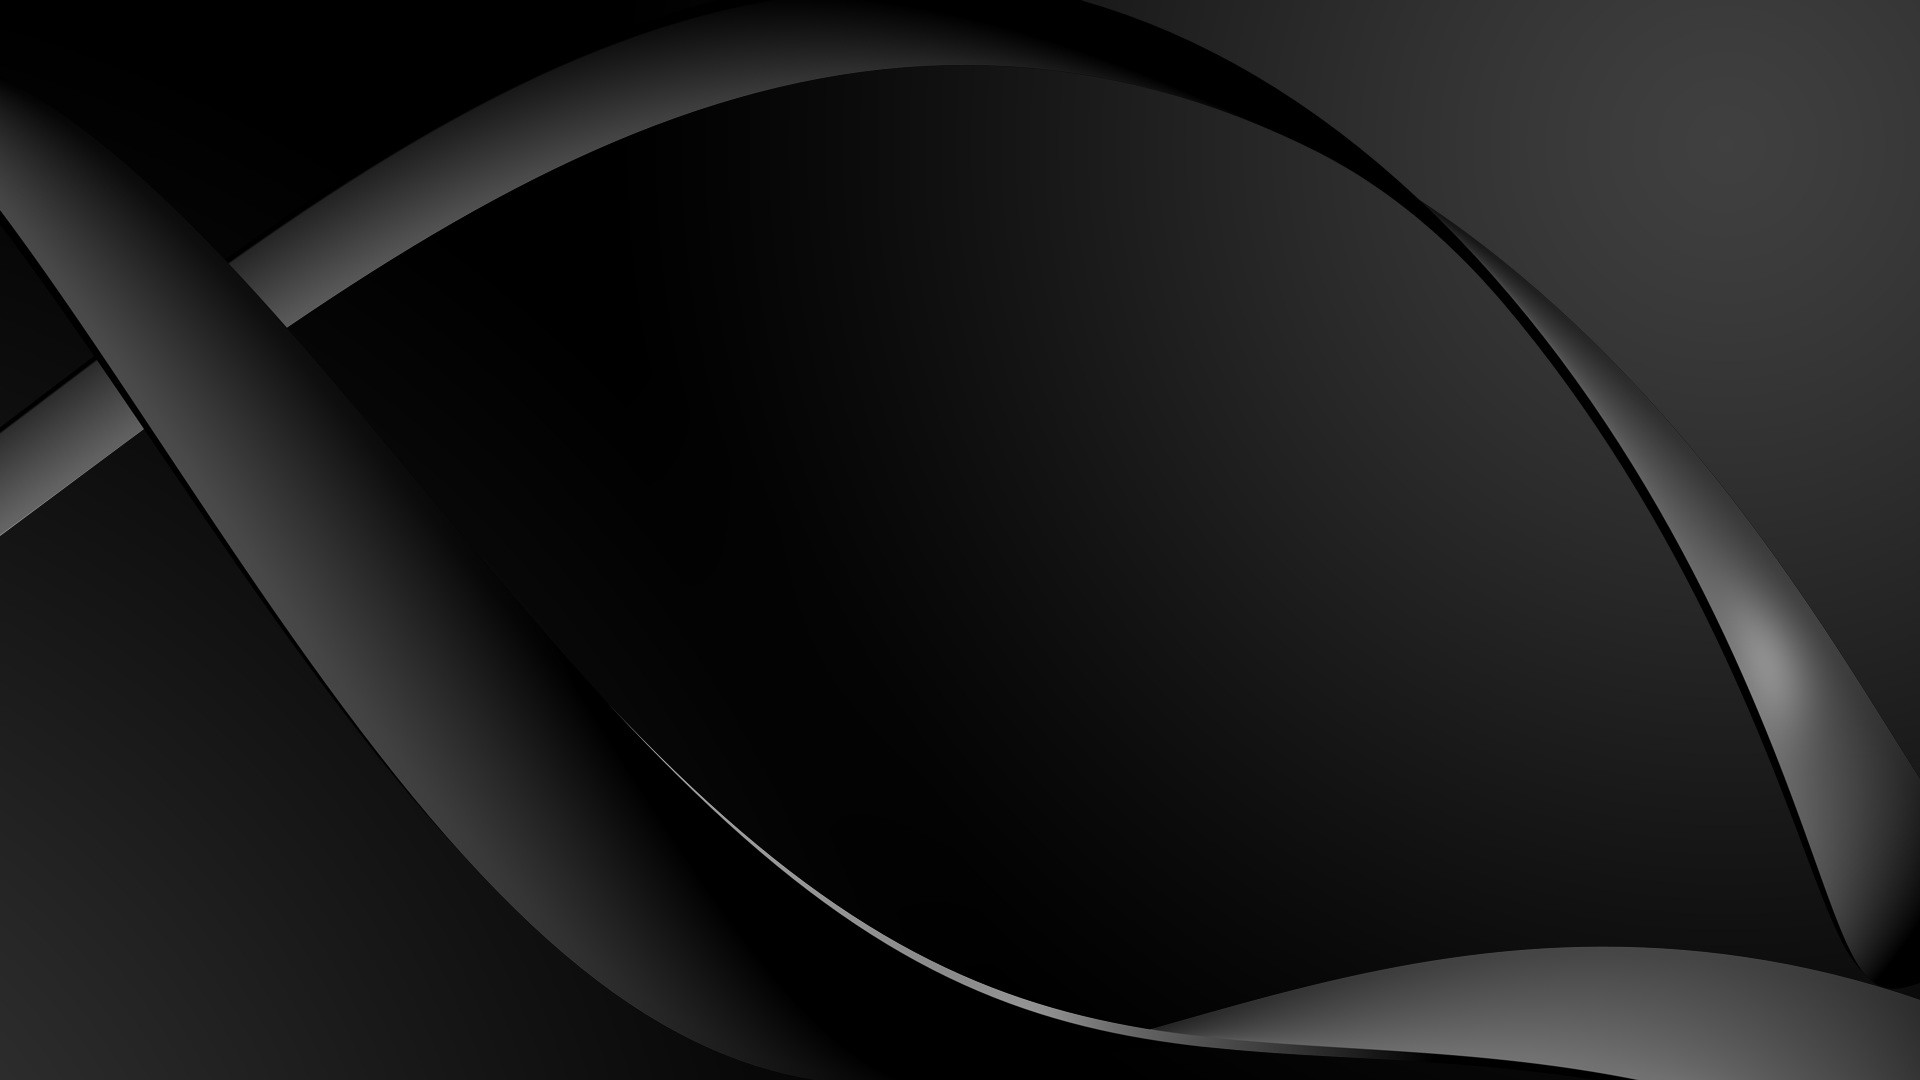 1920x1080 Black Abstract Wallpaper 2835 Hd Wallpapers in Abstract - Imagesci.com